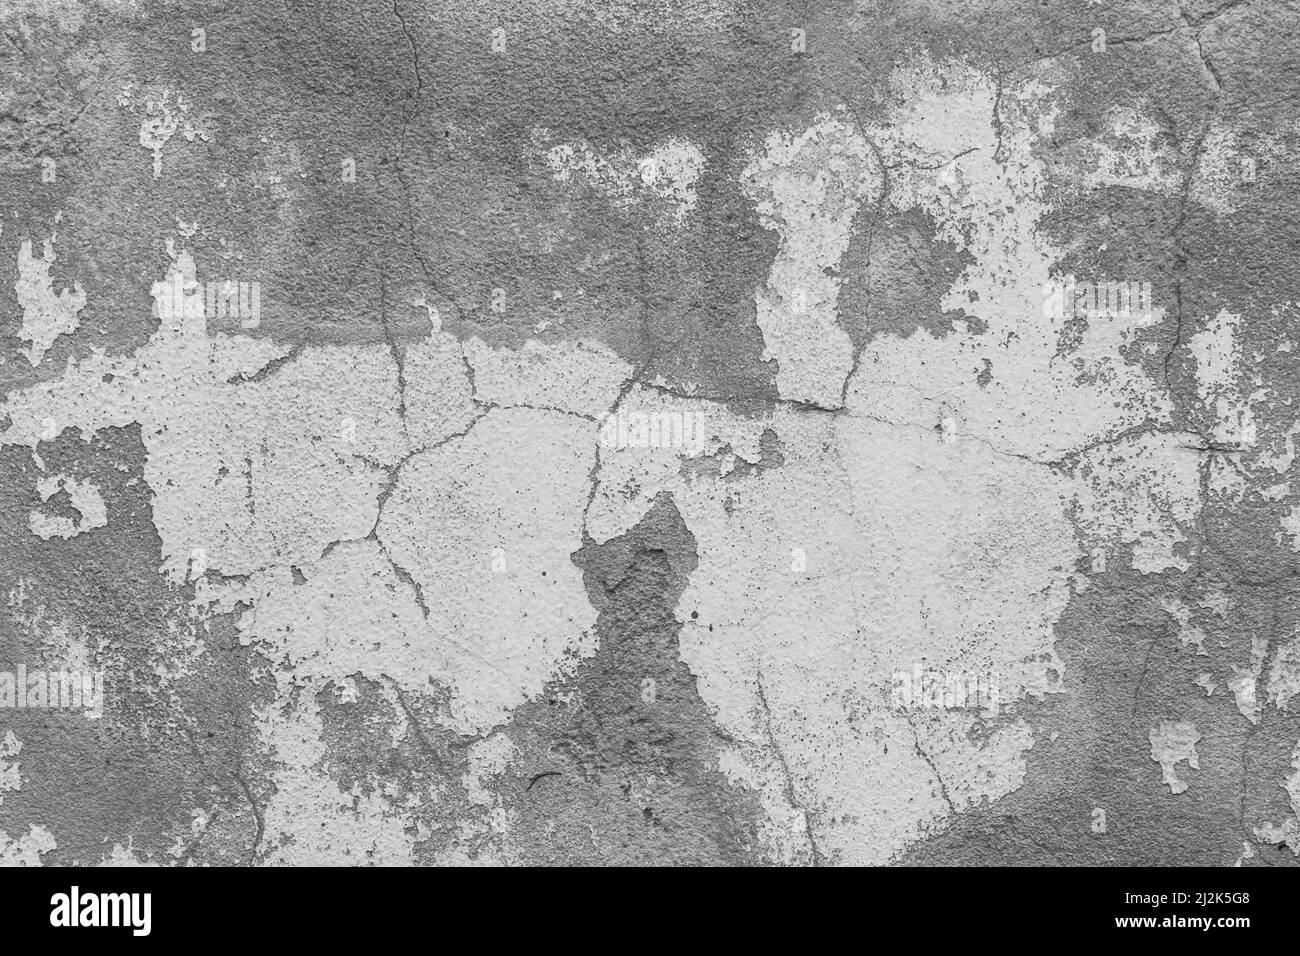 White paint peeling off from old grey cement wall concrete surface rubbed background weathered texture. Stock Photo